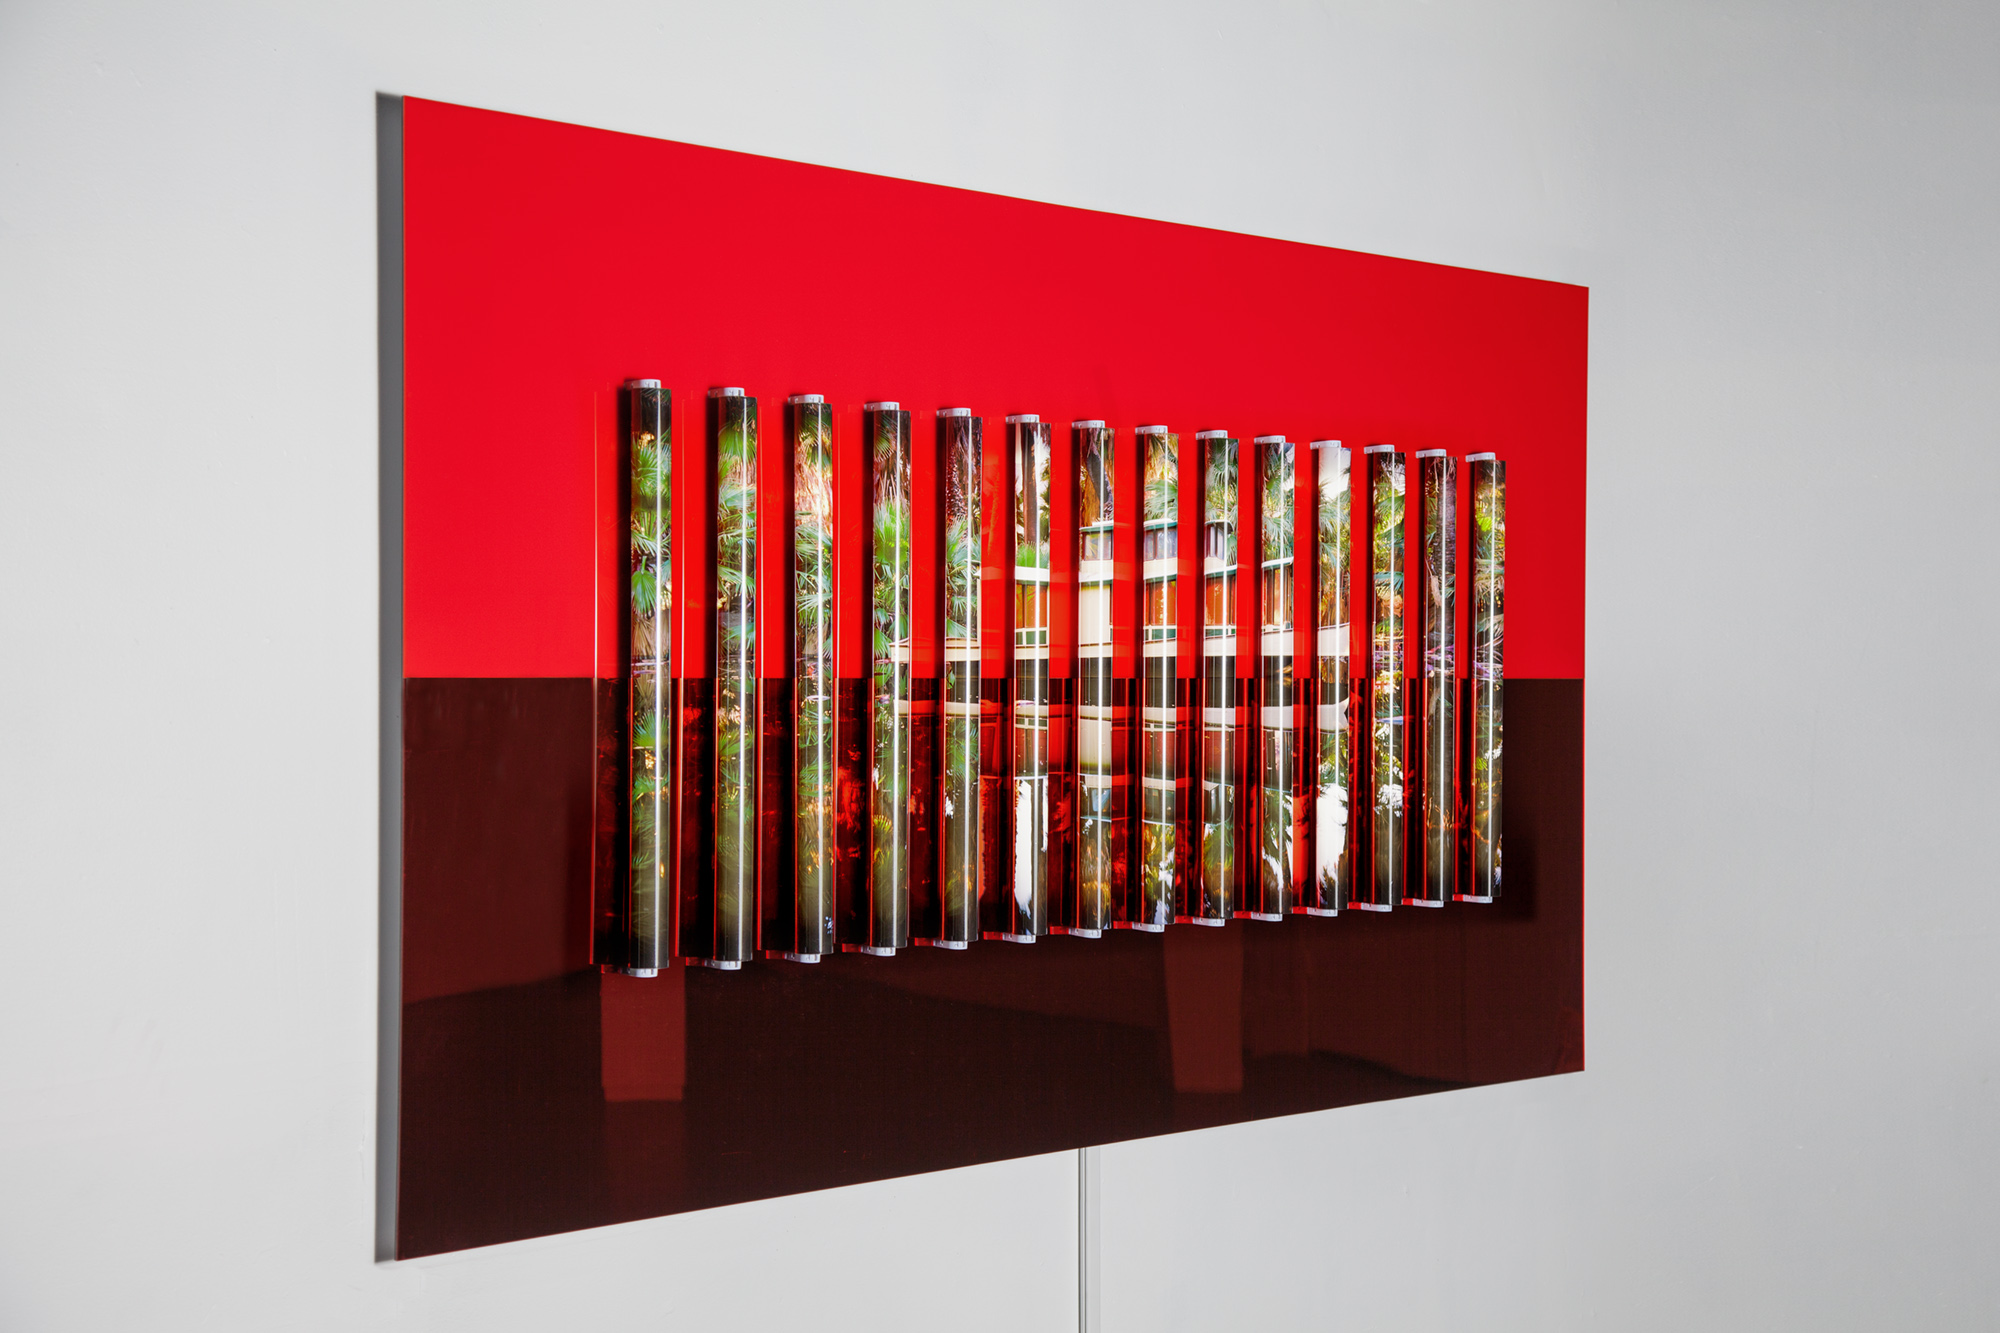 Clint Baclawski, Oasis, 2017. Glossy red Plexiglas and red mirrored Plexiglas on Dibond, archival pigment backlight prints, clear polycarbonate tubes, 2′ LED bulbs 44 x 80 x 3 in.